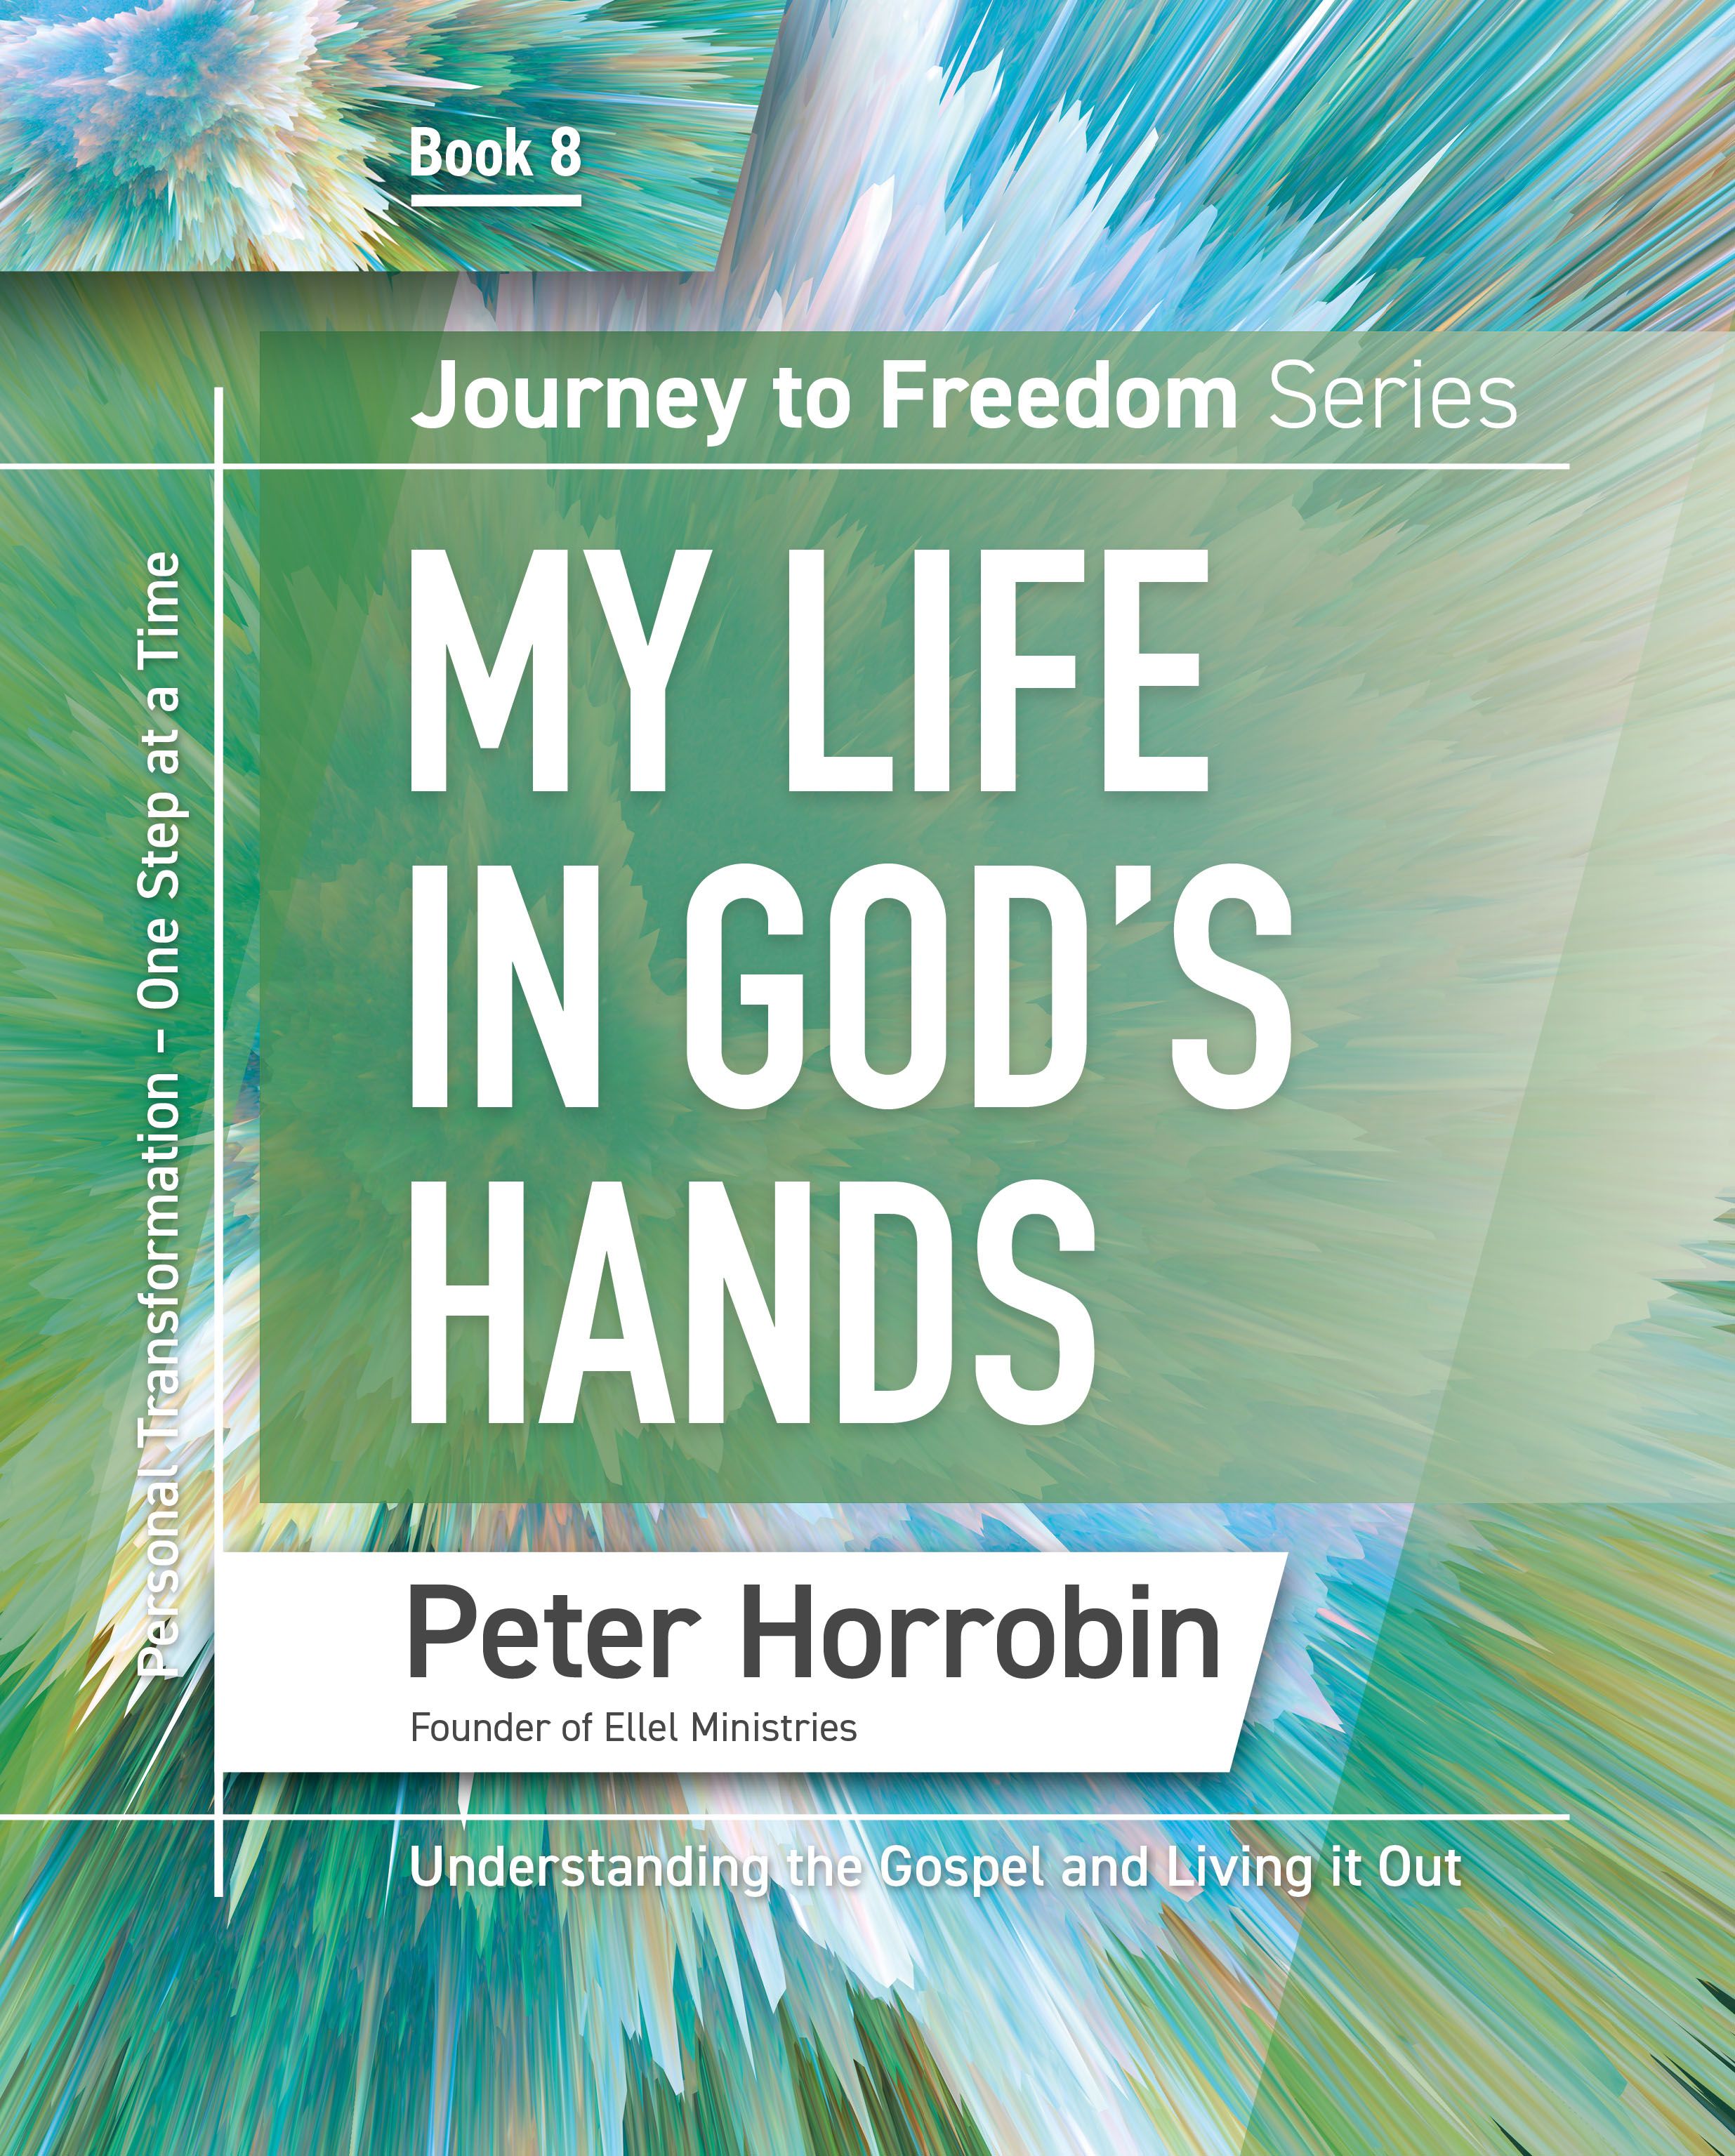 Journey to Freedom Book 8 - My Life in God's Hands